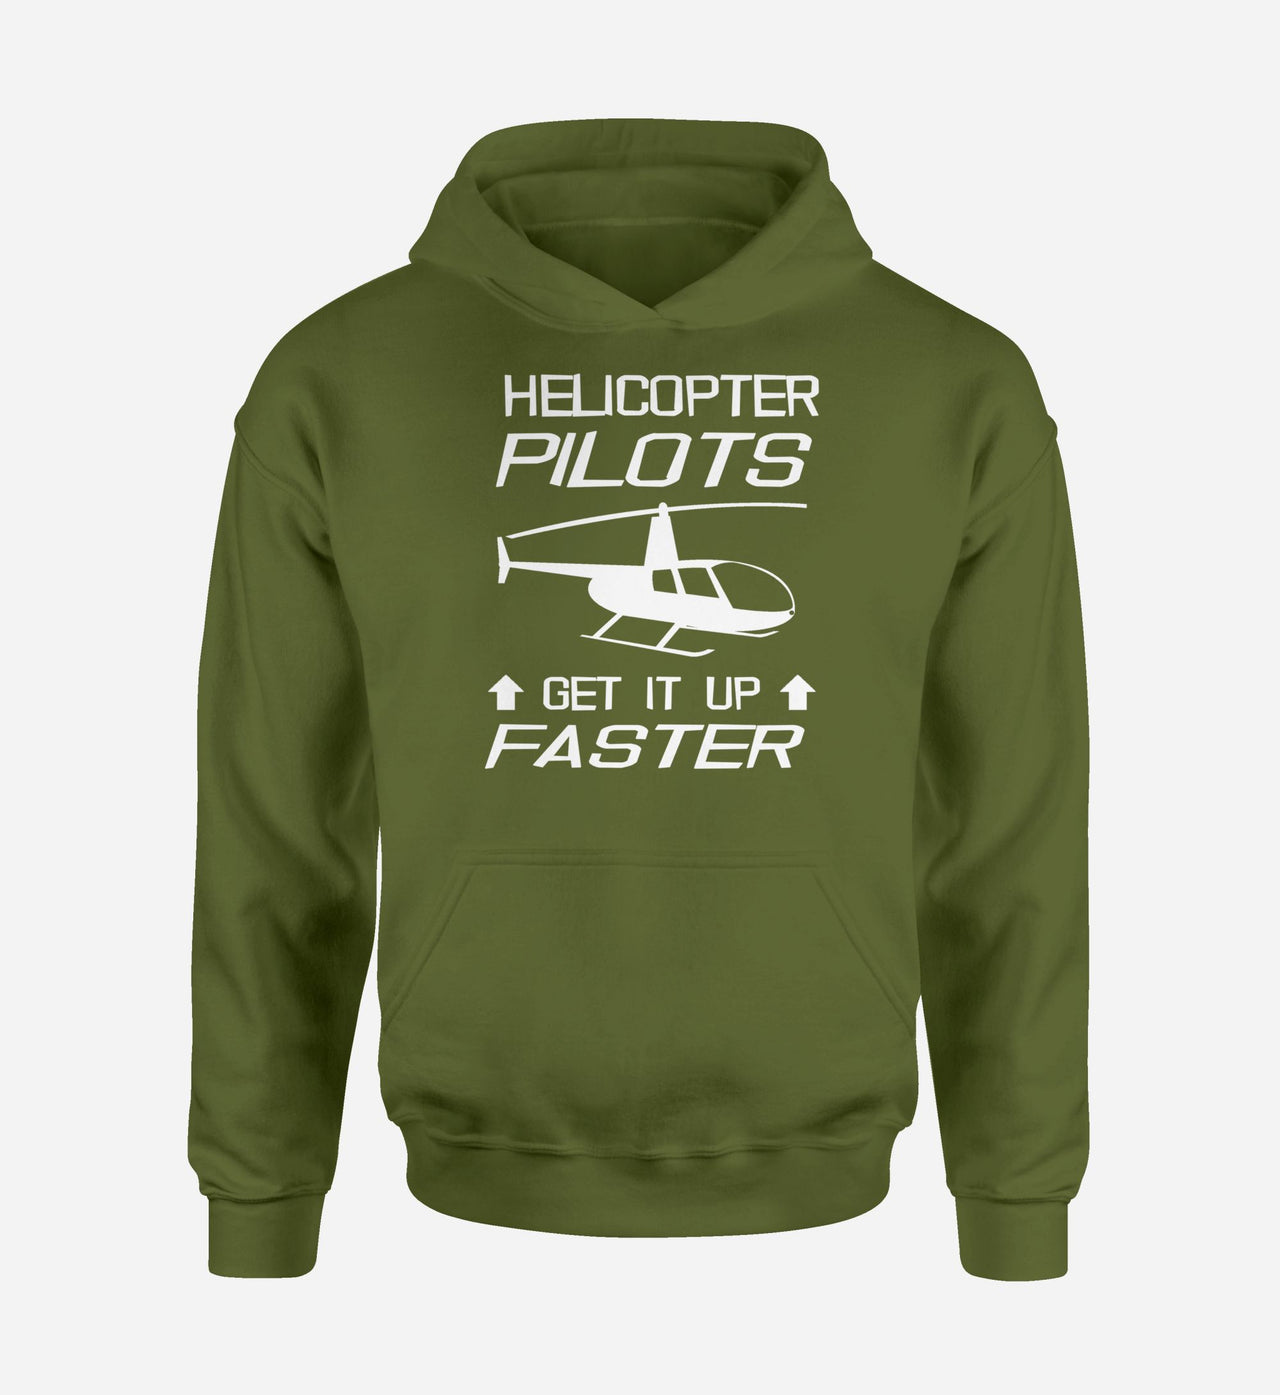 Helicopter Pilots Get It Up Faster Designed Hoodies